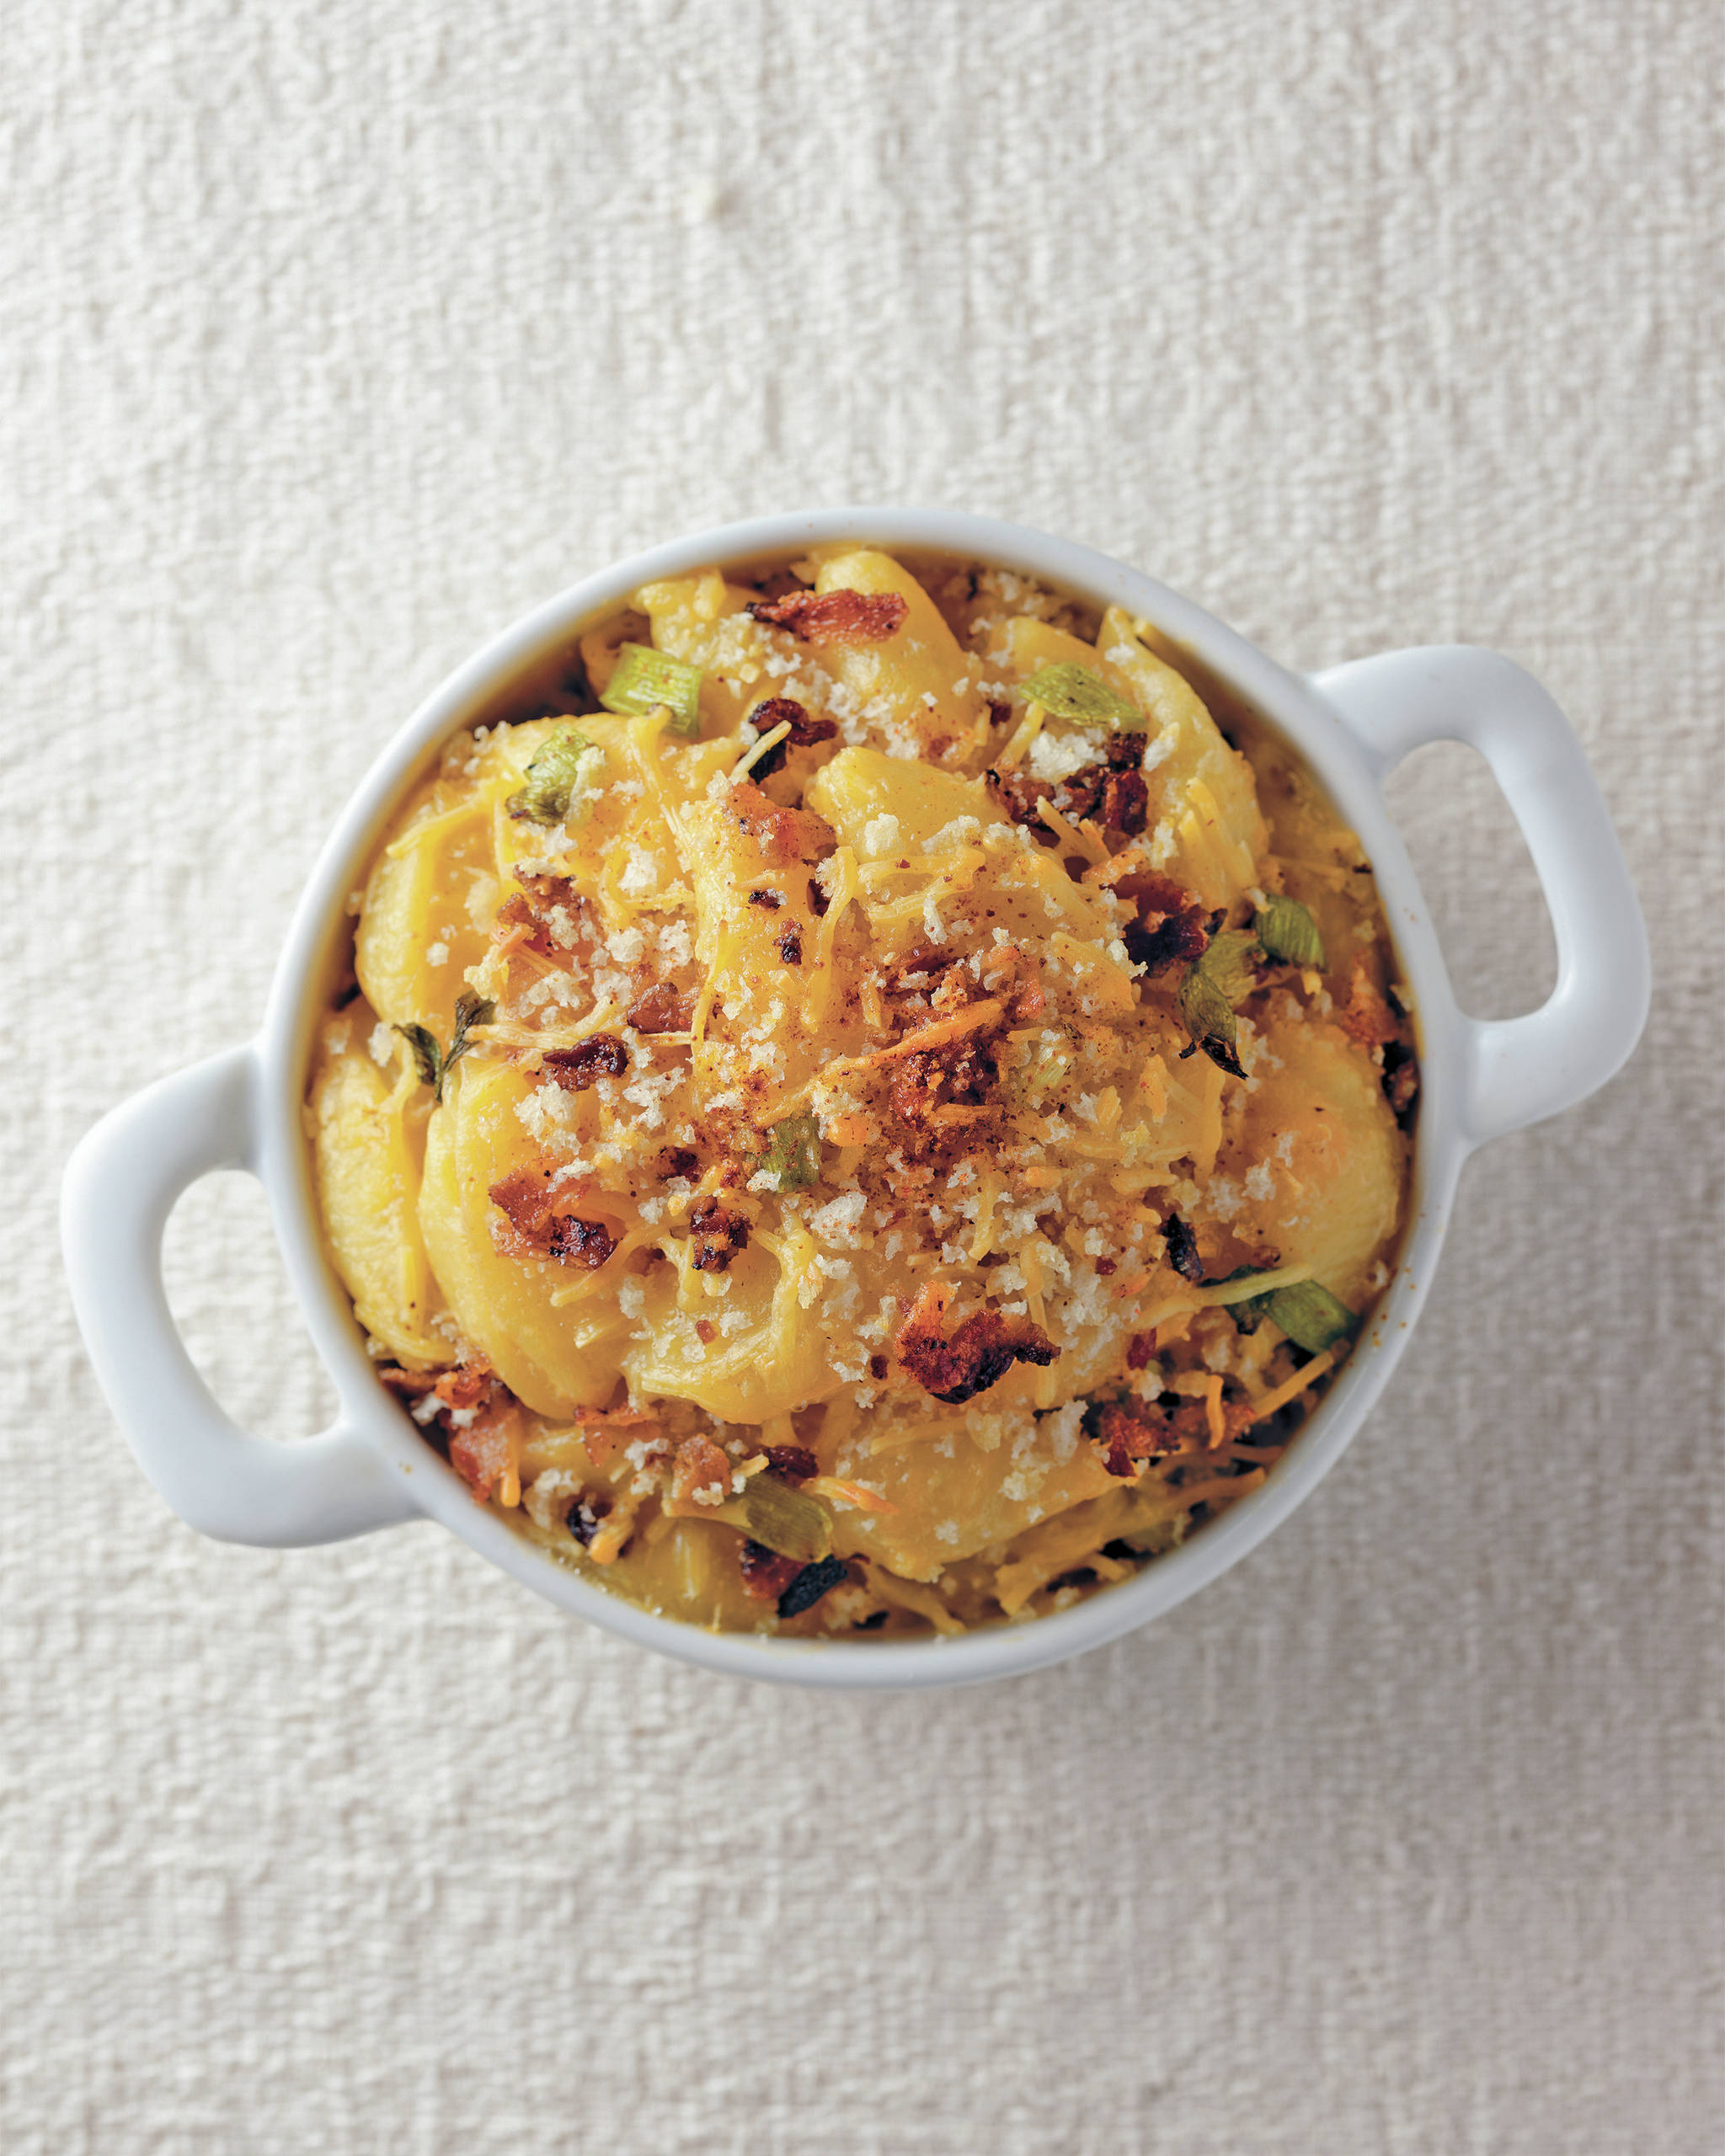 Try this Mac & Cheese for a cold weather dish.